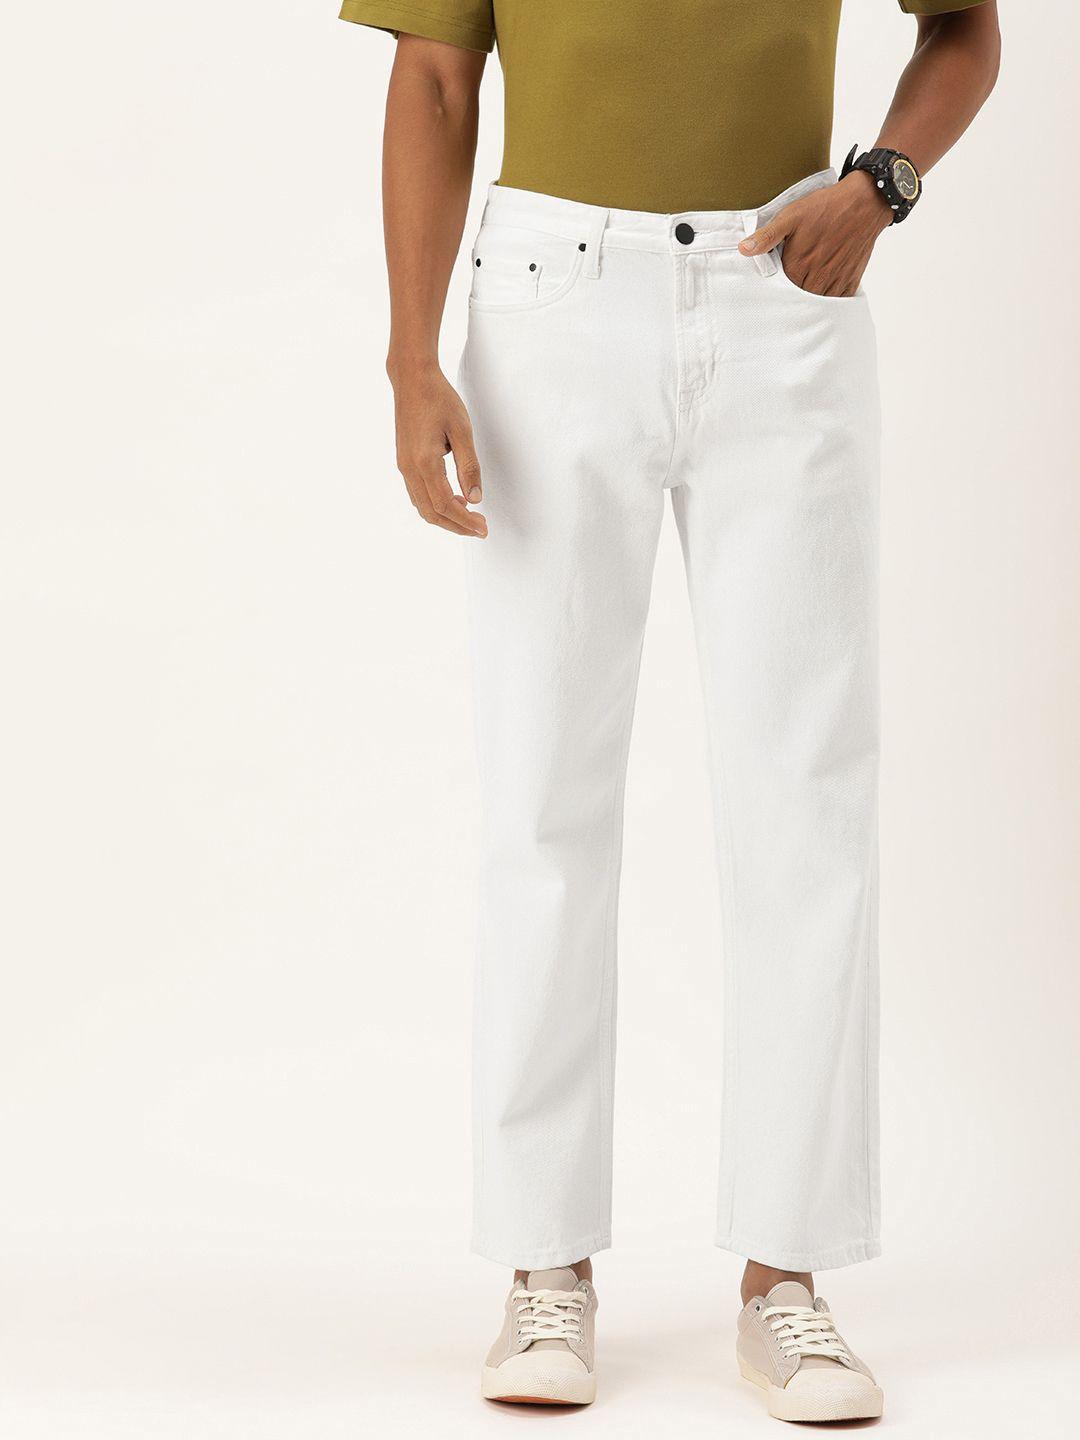 bene-kleed-men-mid-rise-relaxed-fit-pure-cotton-jeans